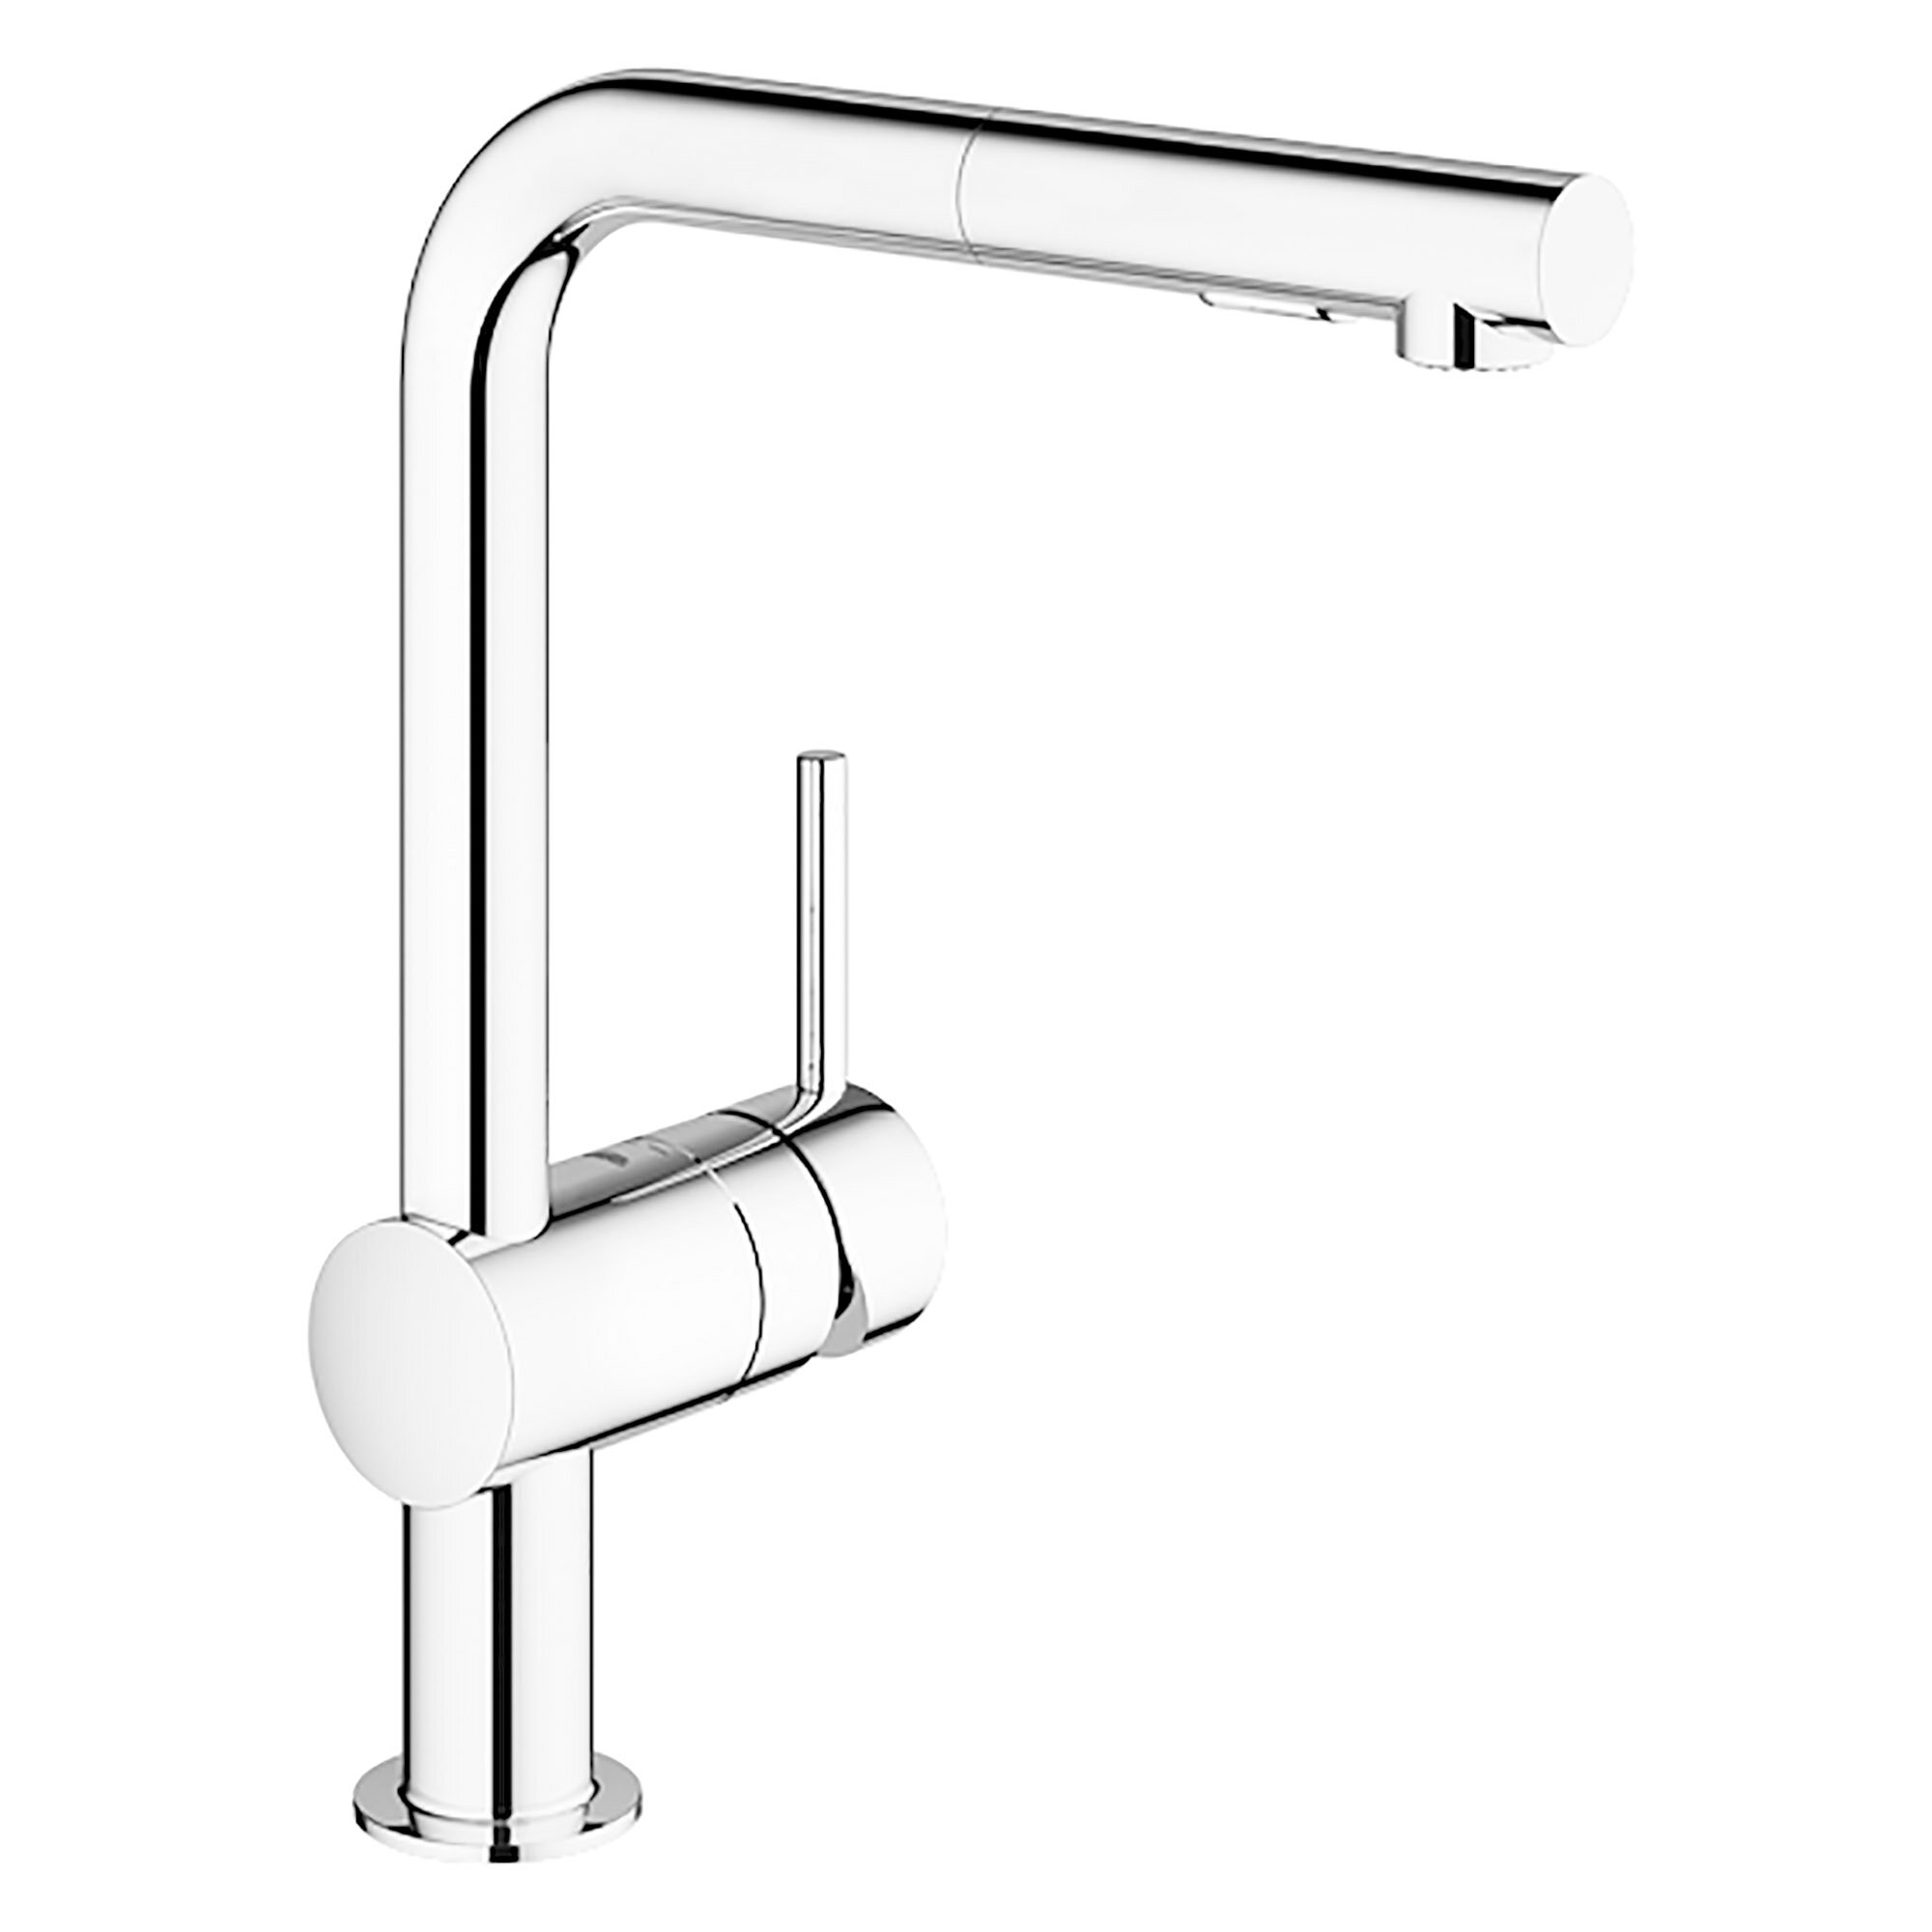 GROHE Minta® Pull Out Single Handle Kitchen Faucet with Accessories   Reviews Perigold